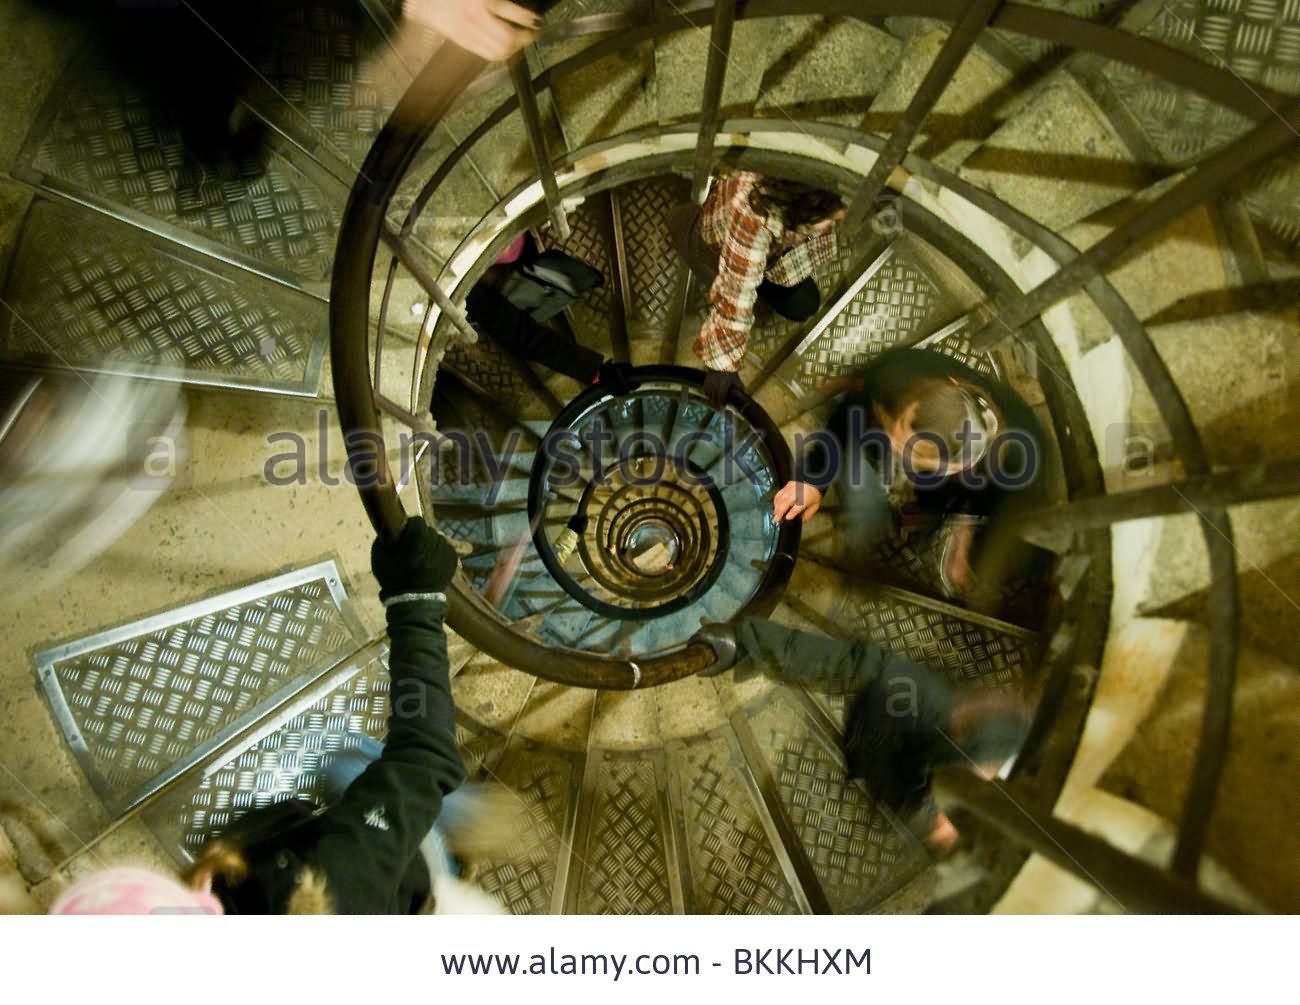 People Climbing The 294 Steps Up The Spiral Staircase Inside The Arc de Triomphe